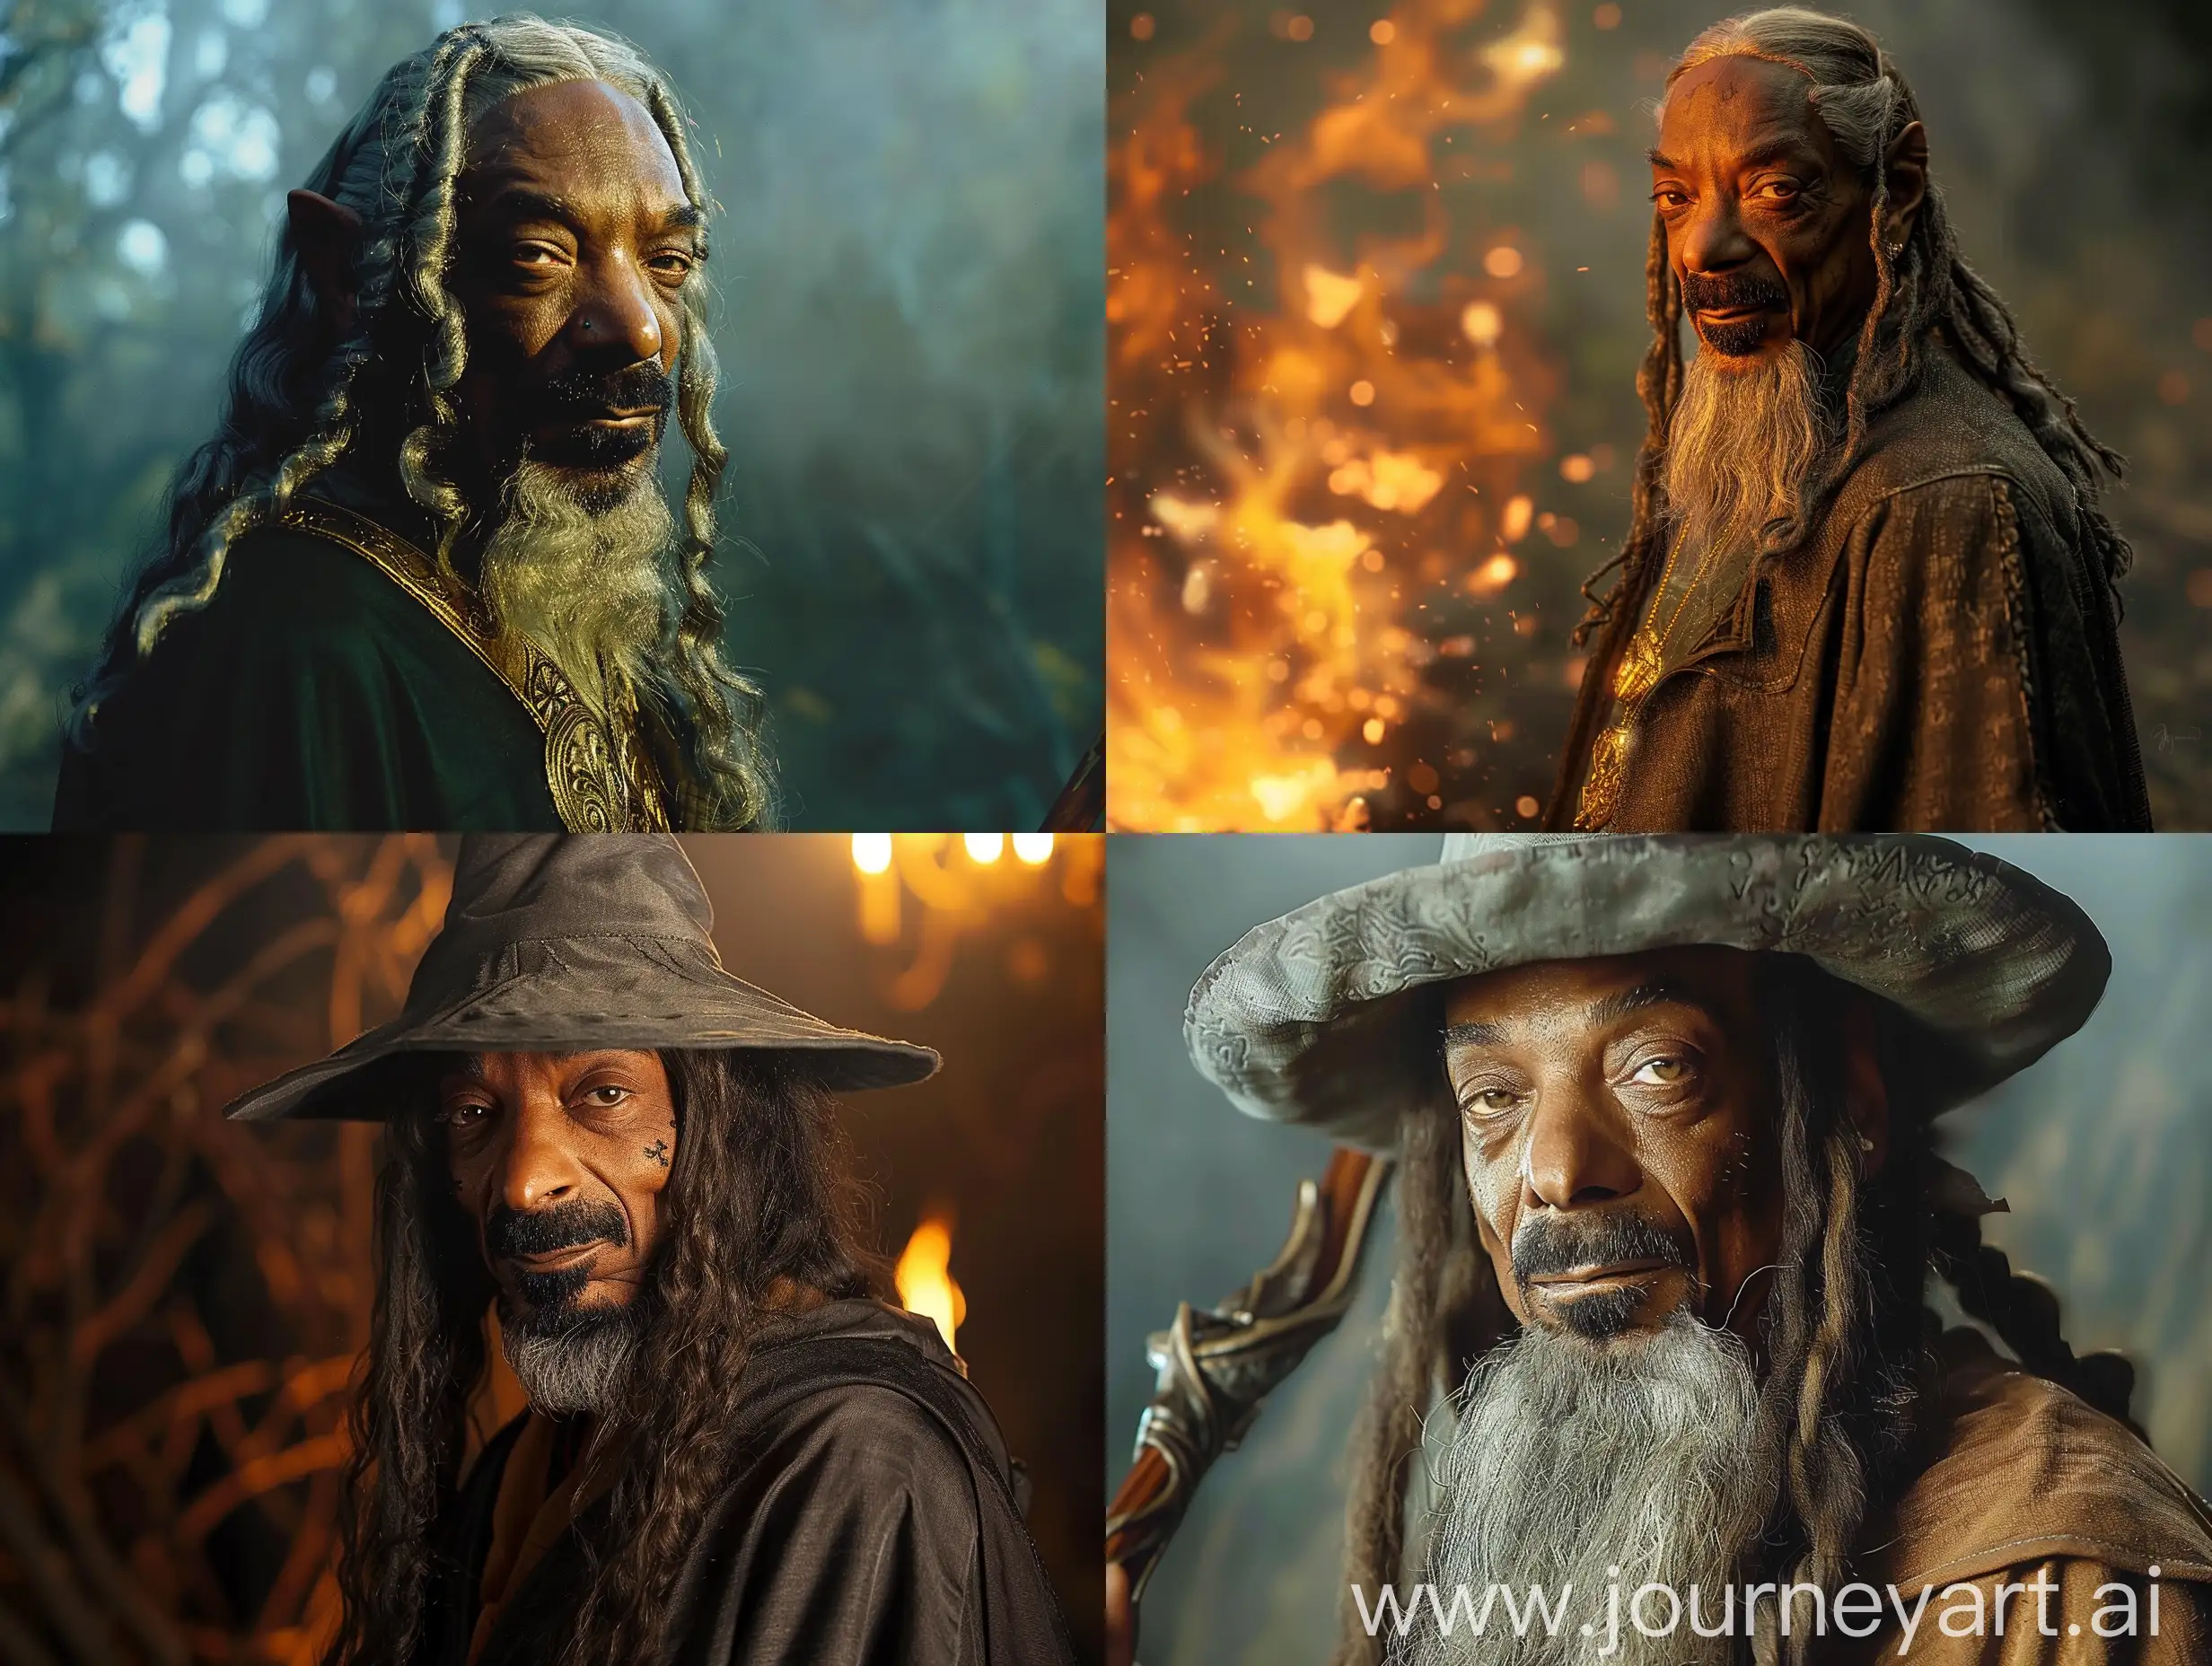 Snoop-Dogg-as-Gandalf-in-a-Cinematic-Lord-of-the-Rings-Scene